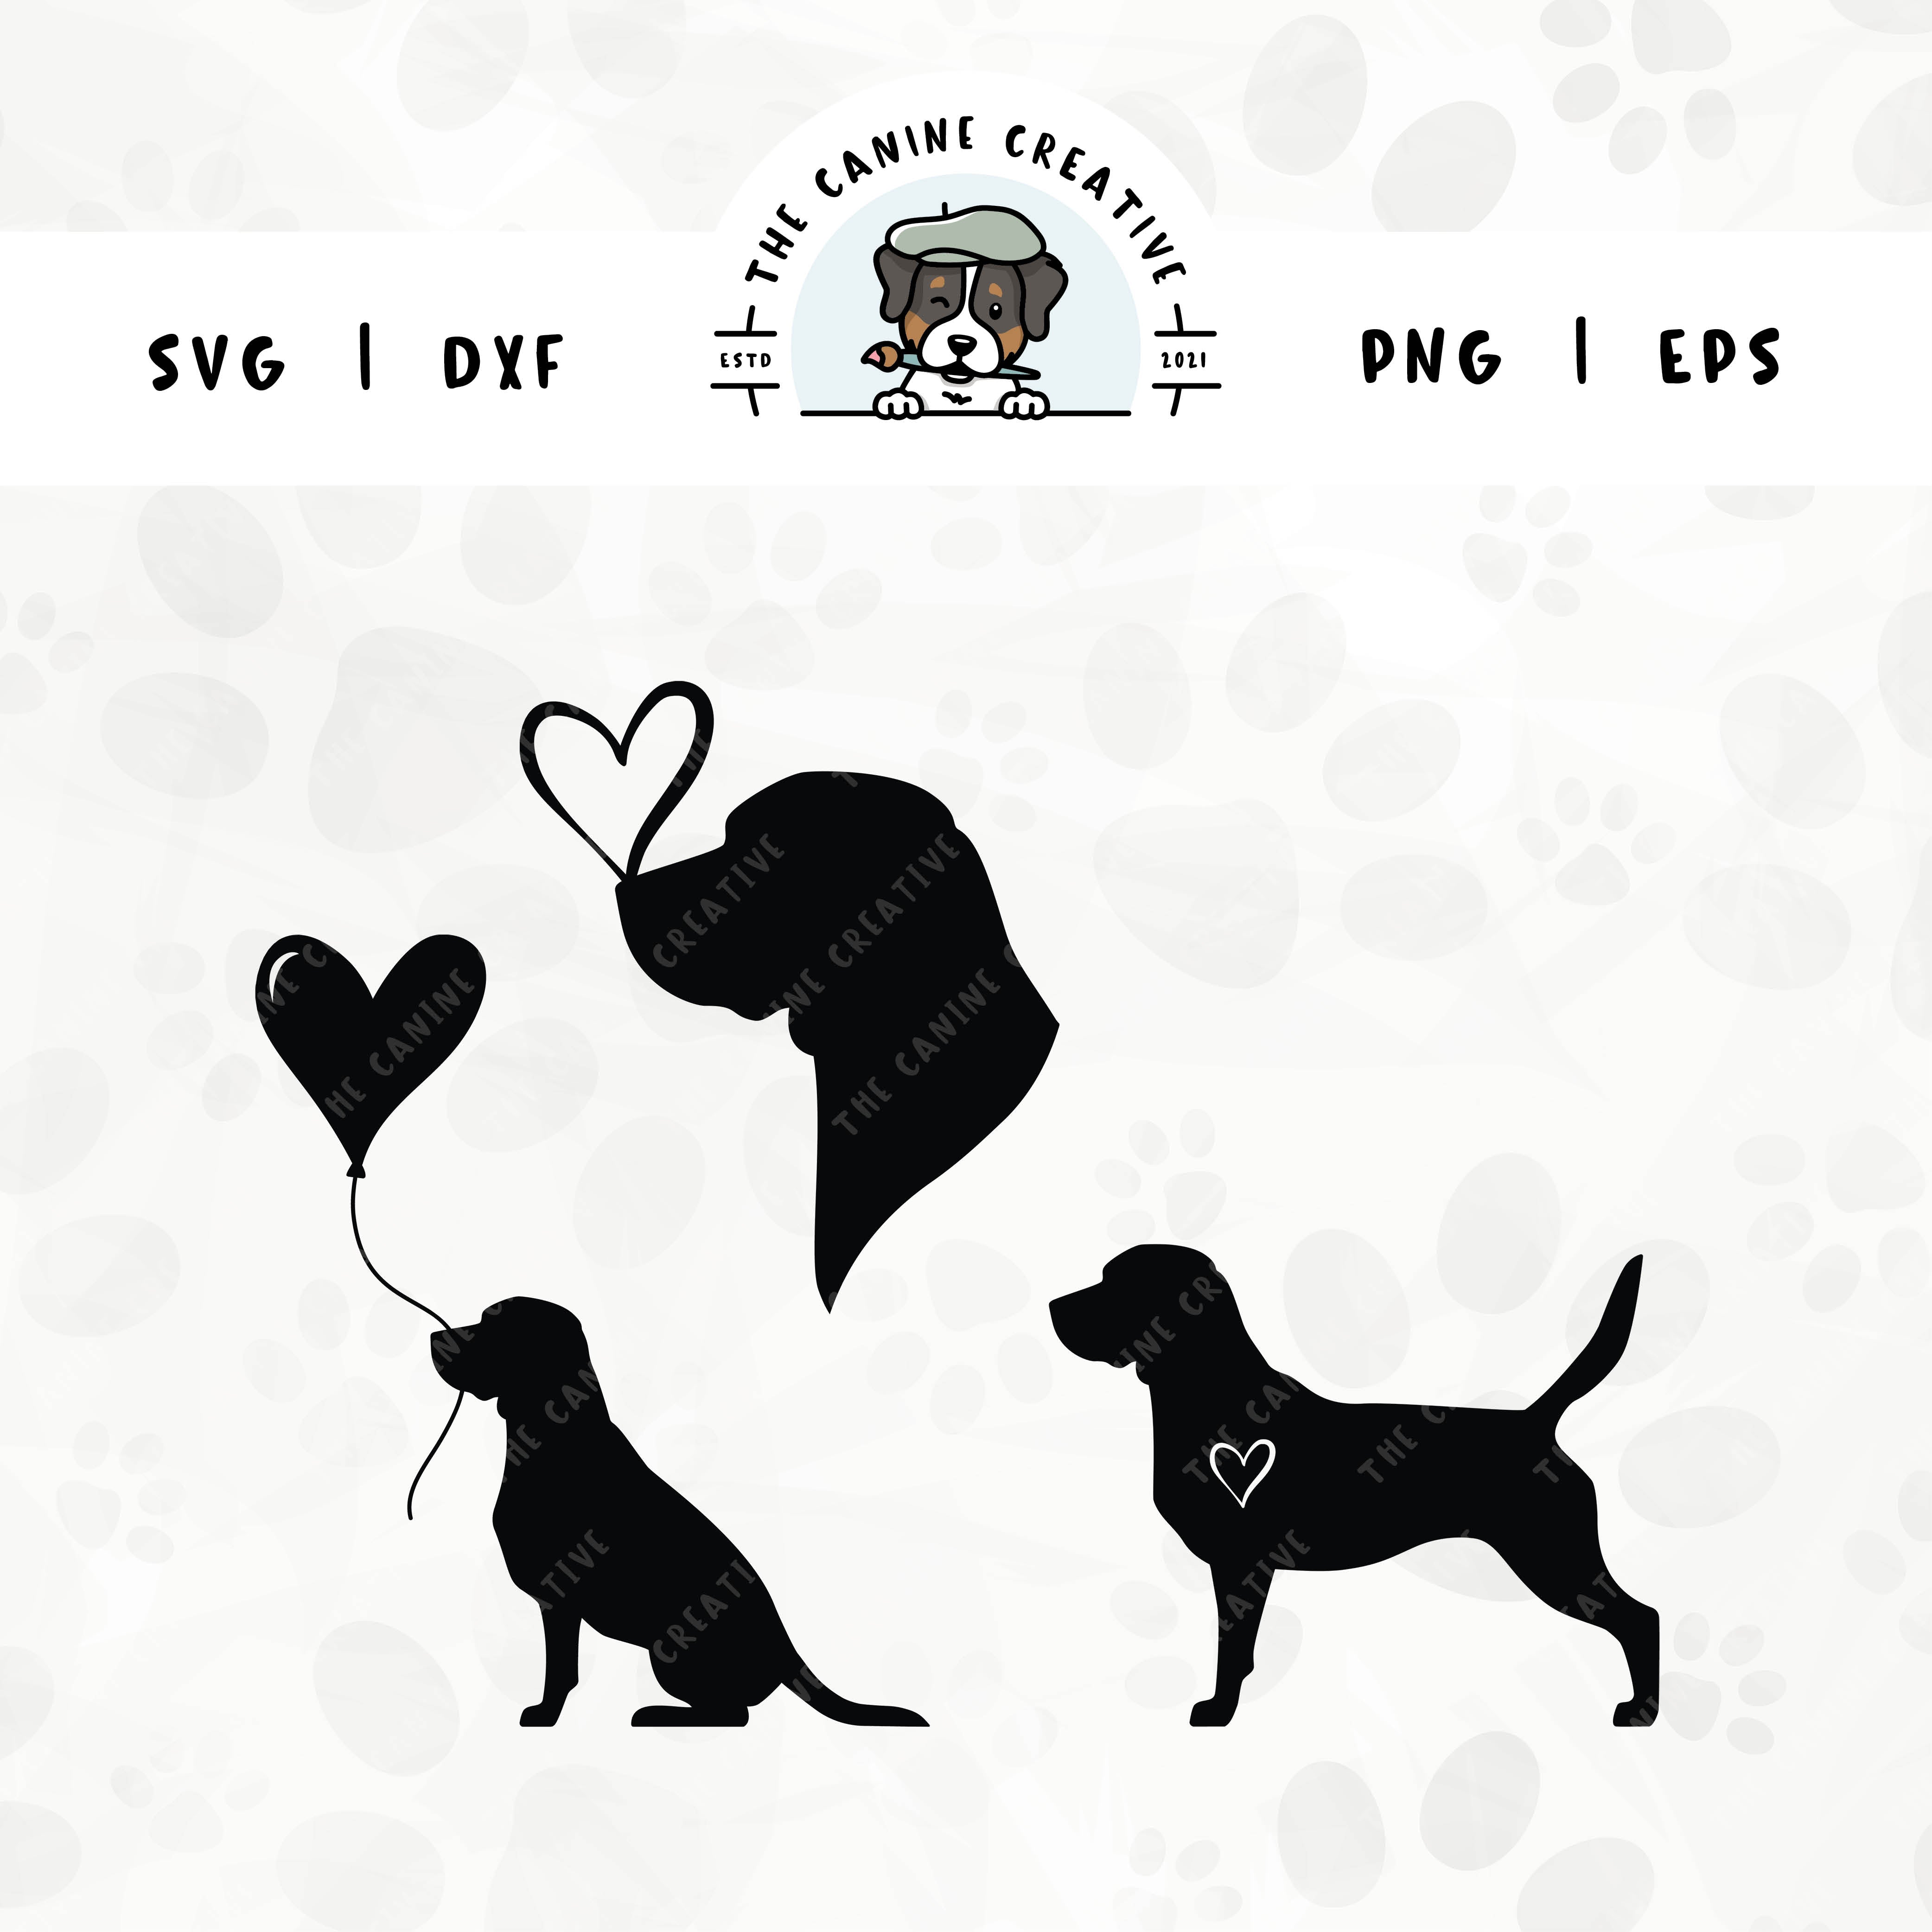 This 3-pack Beagle silhouette bundle features a head portrait of a dog with a heart perched atop it’s nose, a sitting dog holding a heart balloon, and a standing profile of a dog with a heart inset. File formats include: SVG, DXF, PNG, and EPS.